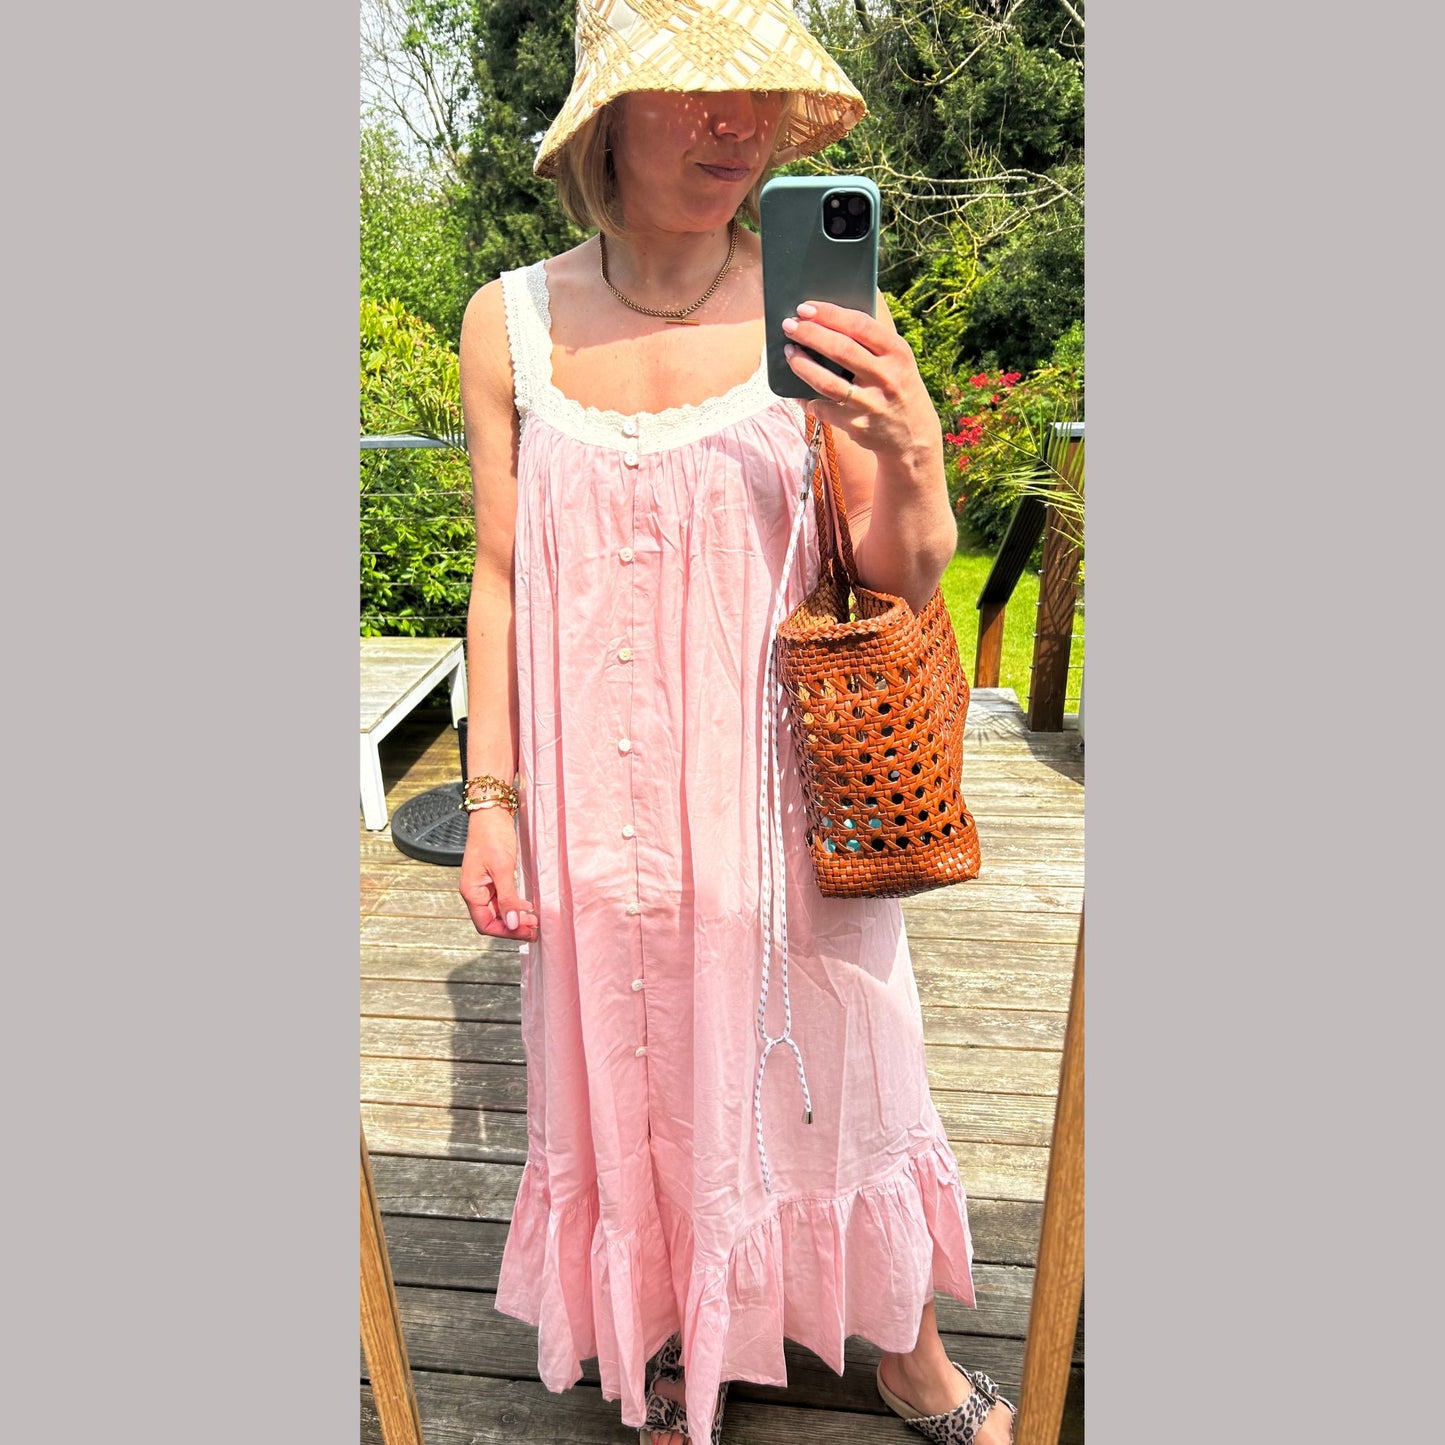 Model wearing the Pink Vintage Style Sundress/Nightdress with a sunhat, standing in a garden